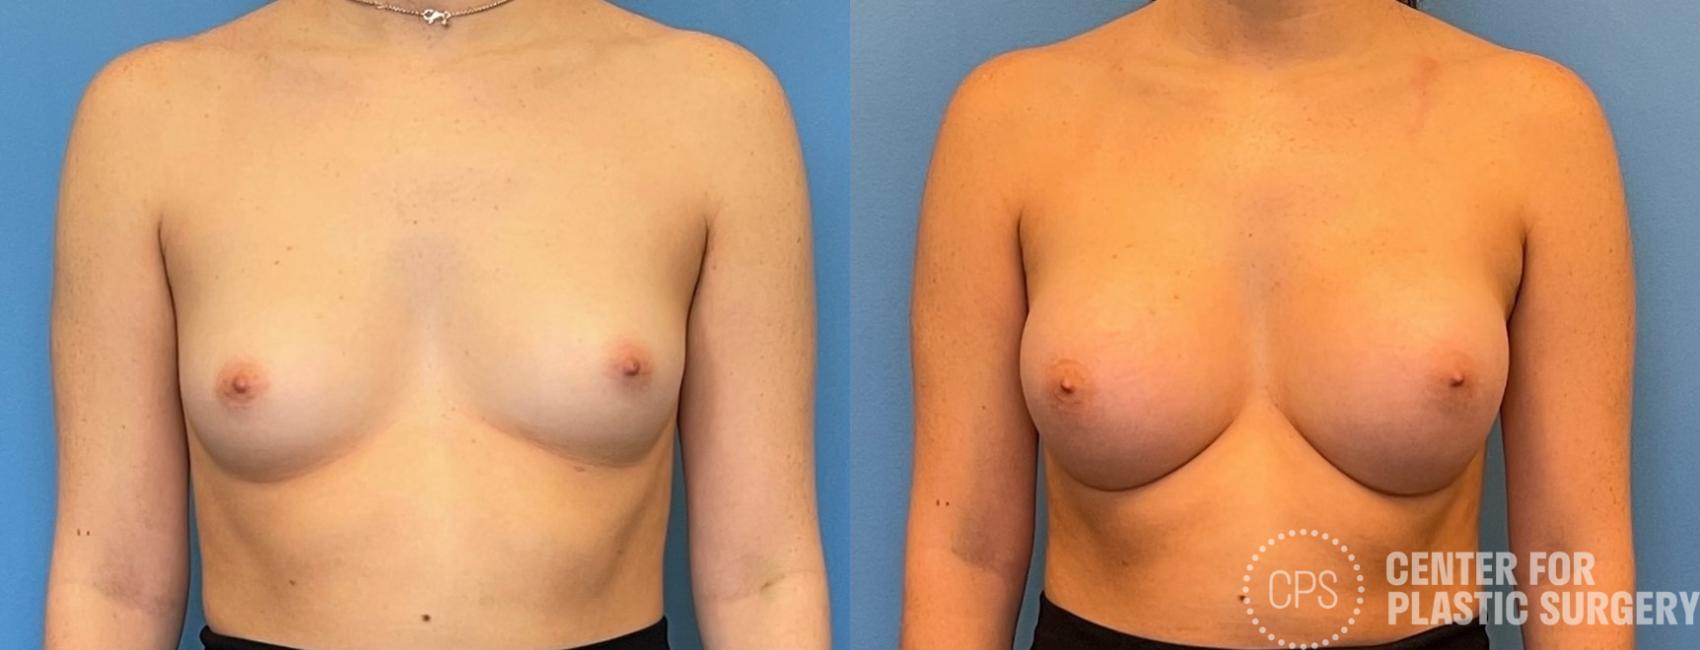 Breast Augmentation Case 224 Before & After Front | Chevy Chase & Annandale, Washington D.C. Metropolitan Area | Center for Plastic Surgery